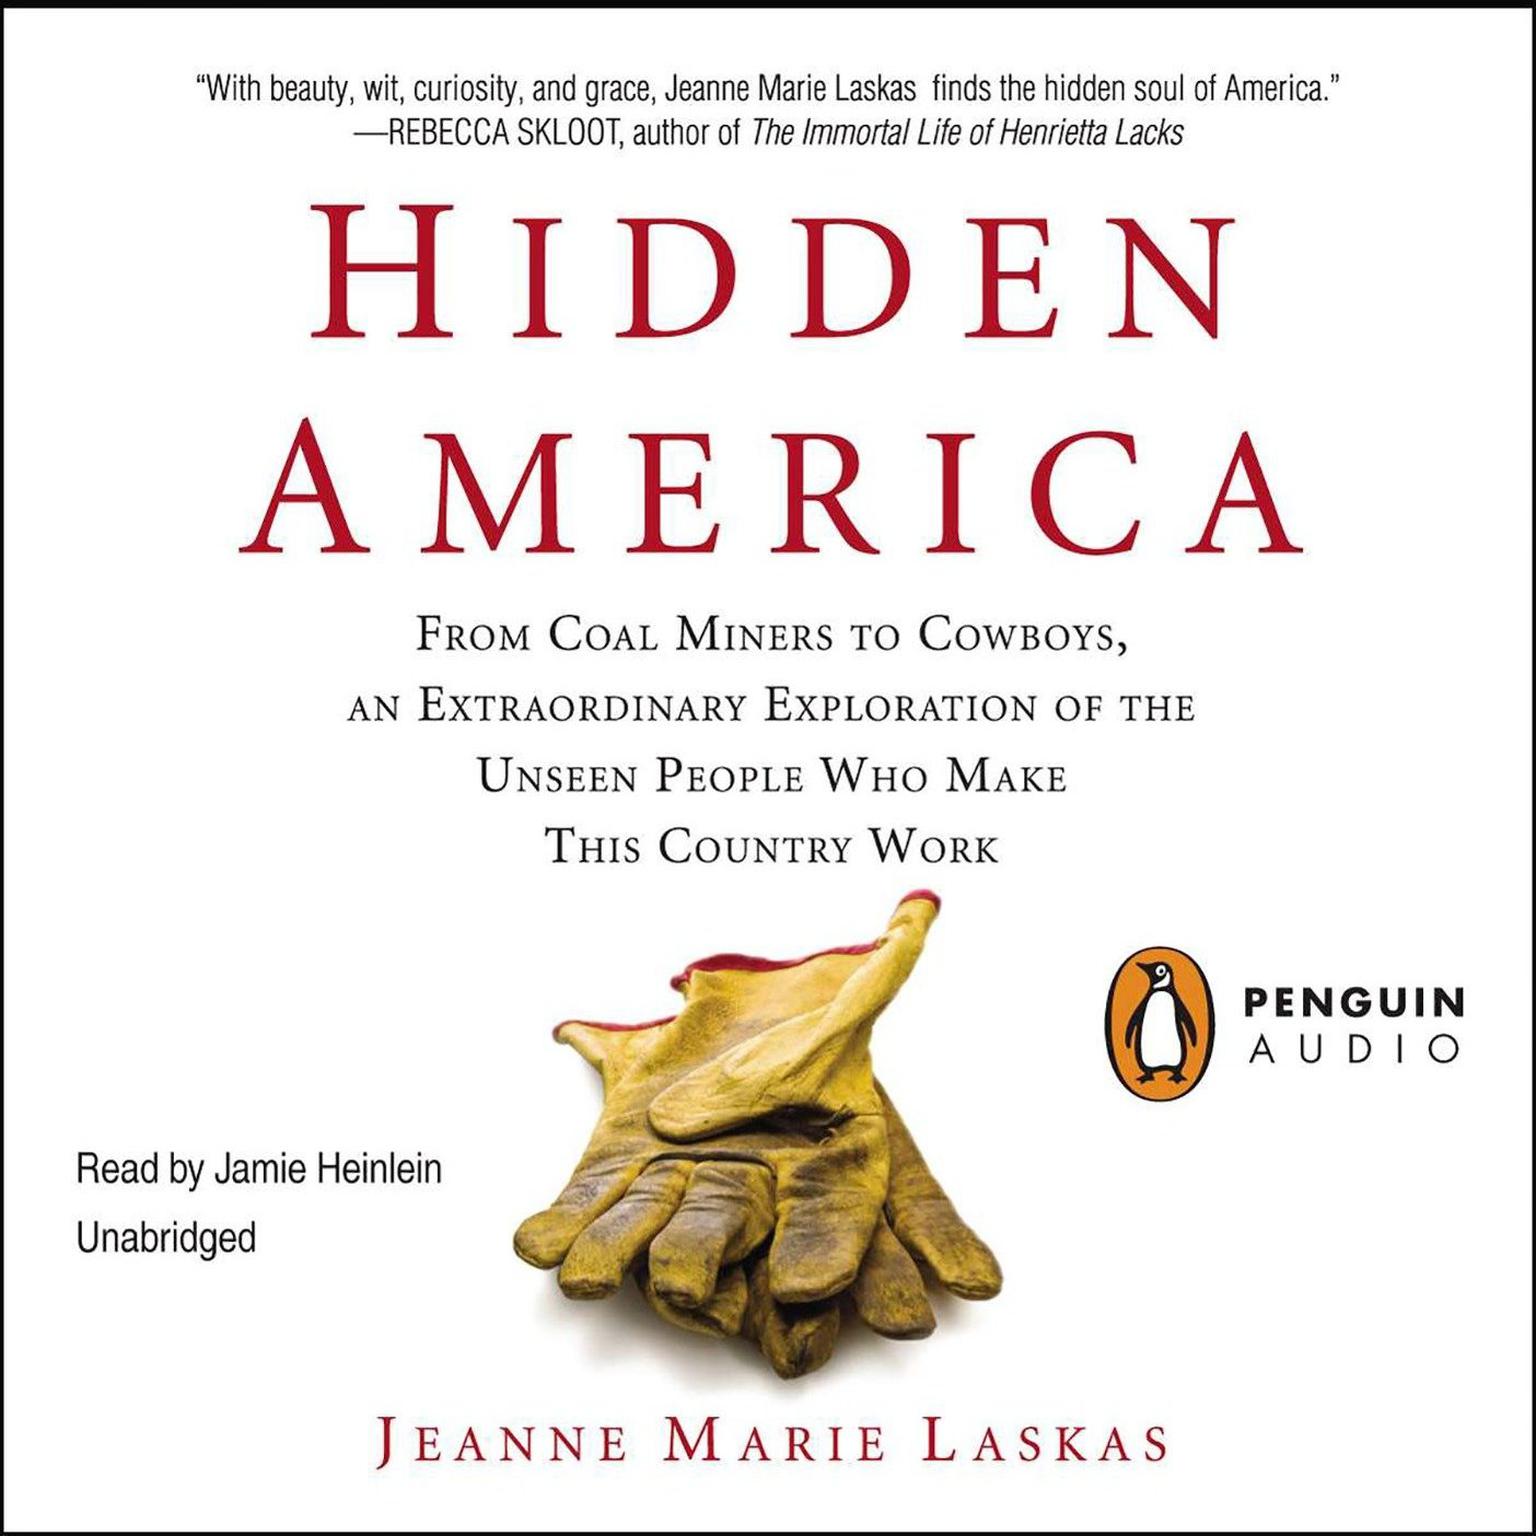 Hidden America: From Coal Miners to Cowboys, an Extraordinary Exploration of the Unseen People Who Make This Country Work Audiobook, by Jeanne Marie Laskas